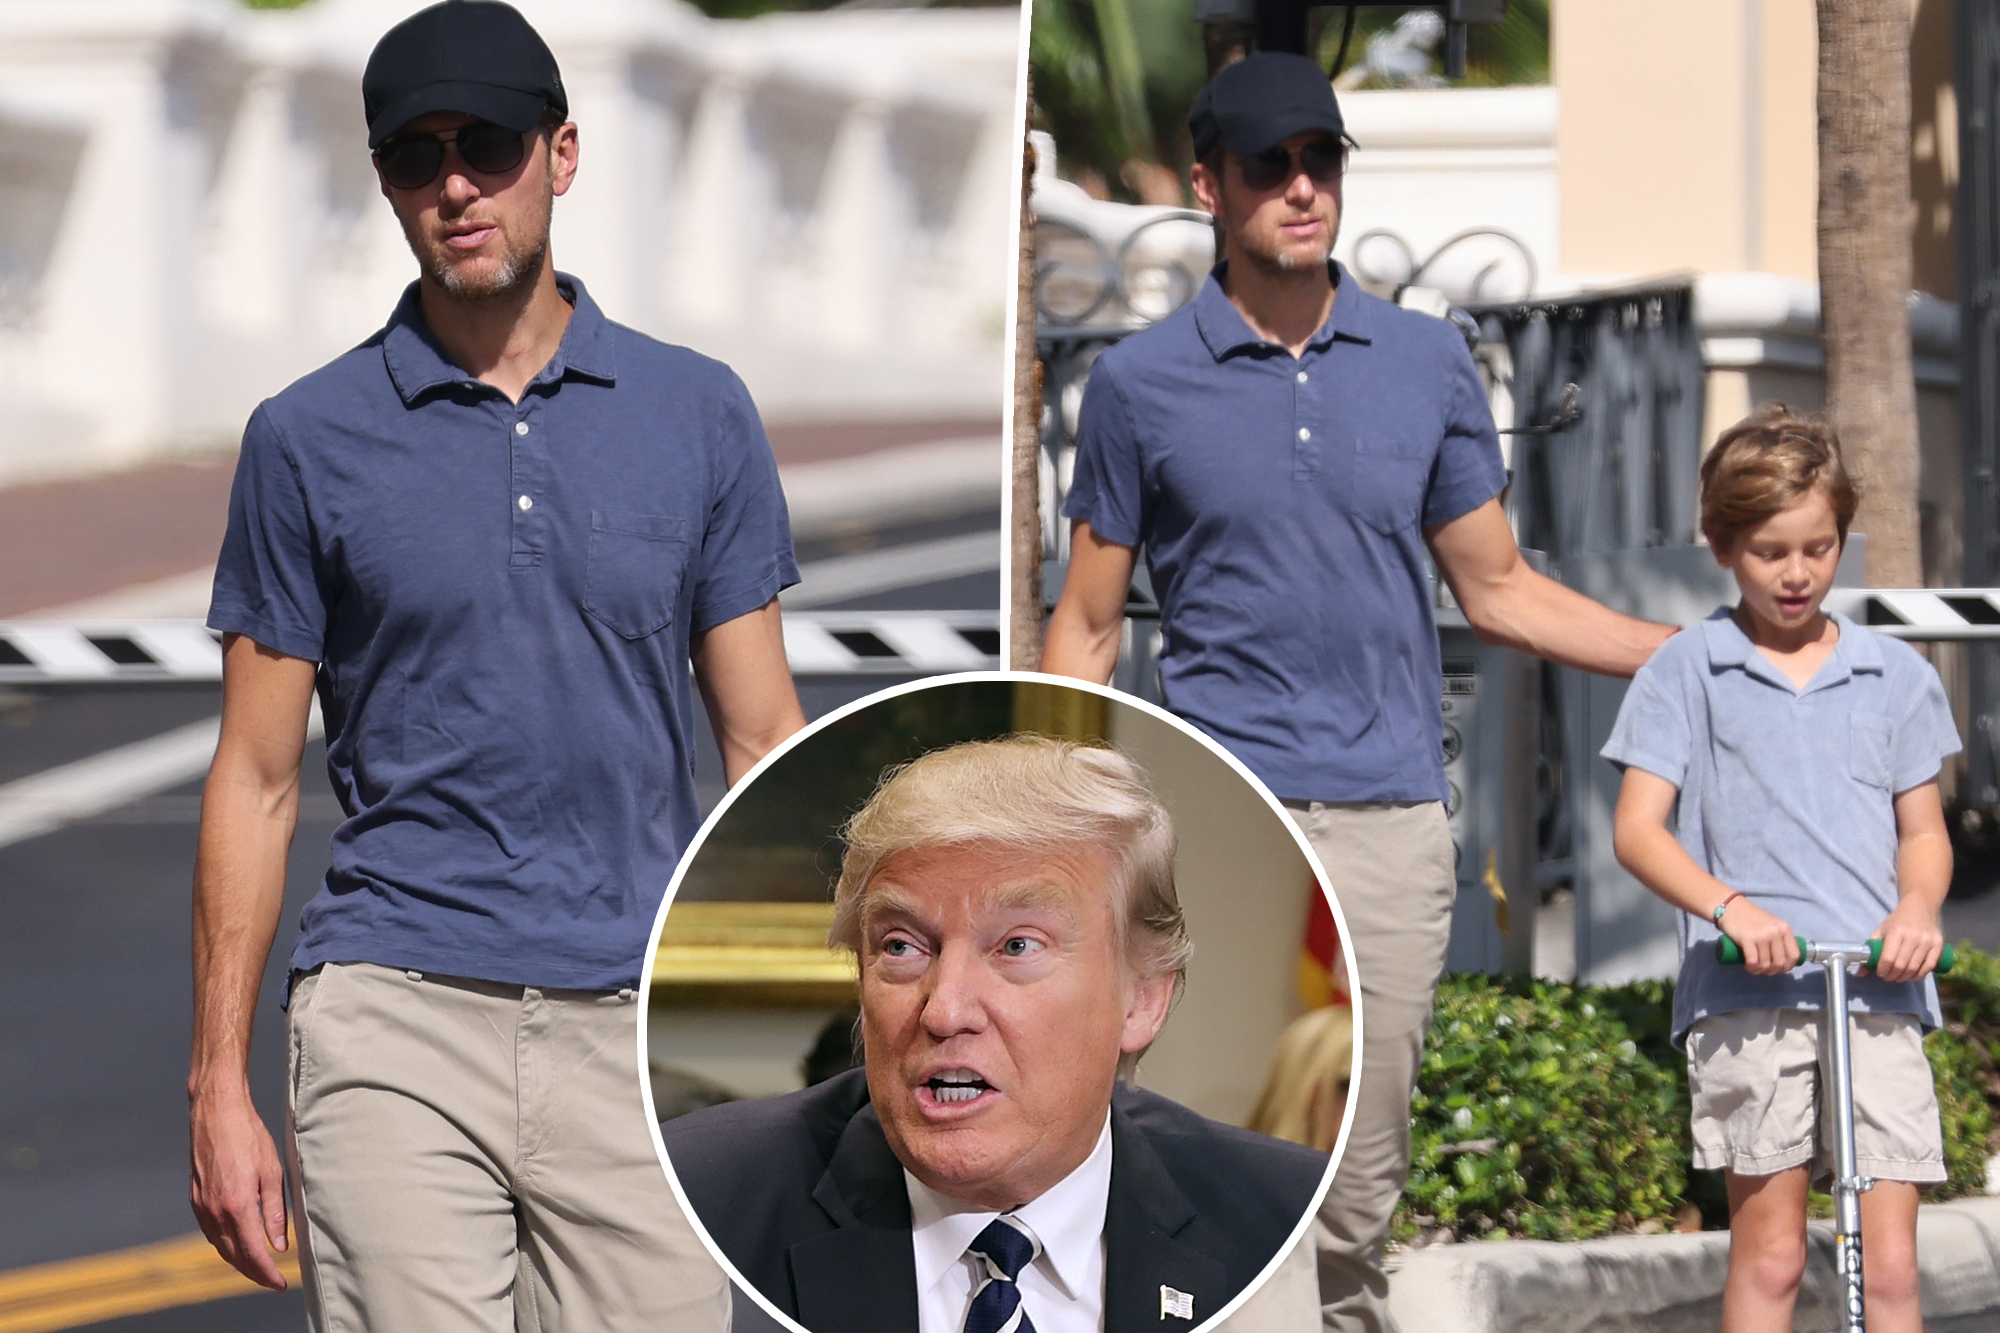 Jared Kushner attends temple with his and Ivanka’s kids after Donald Trump’s felony conviction